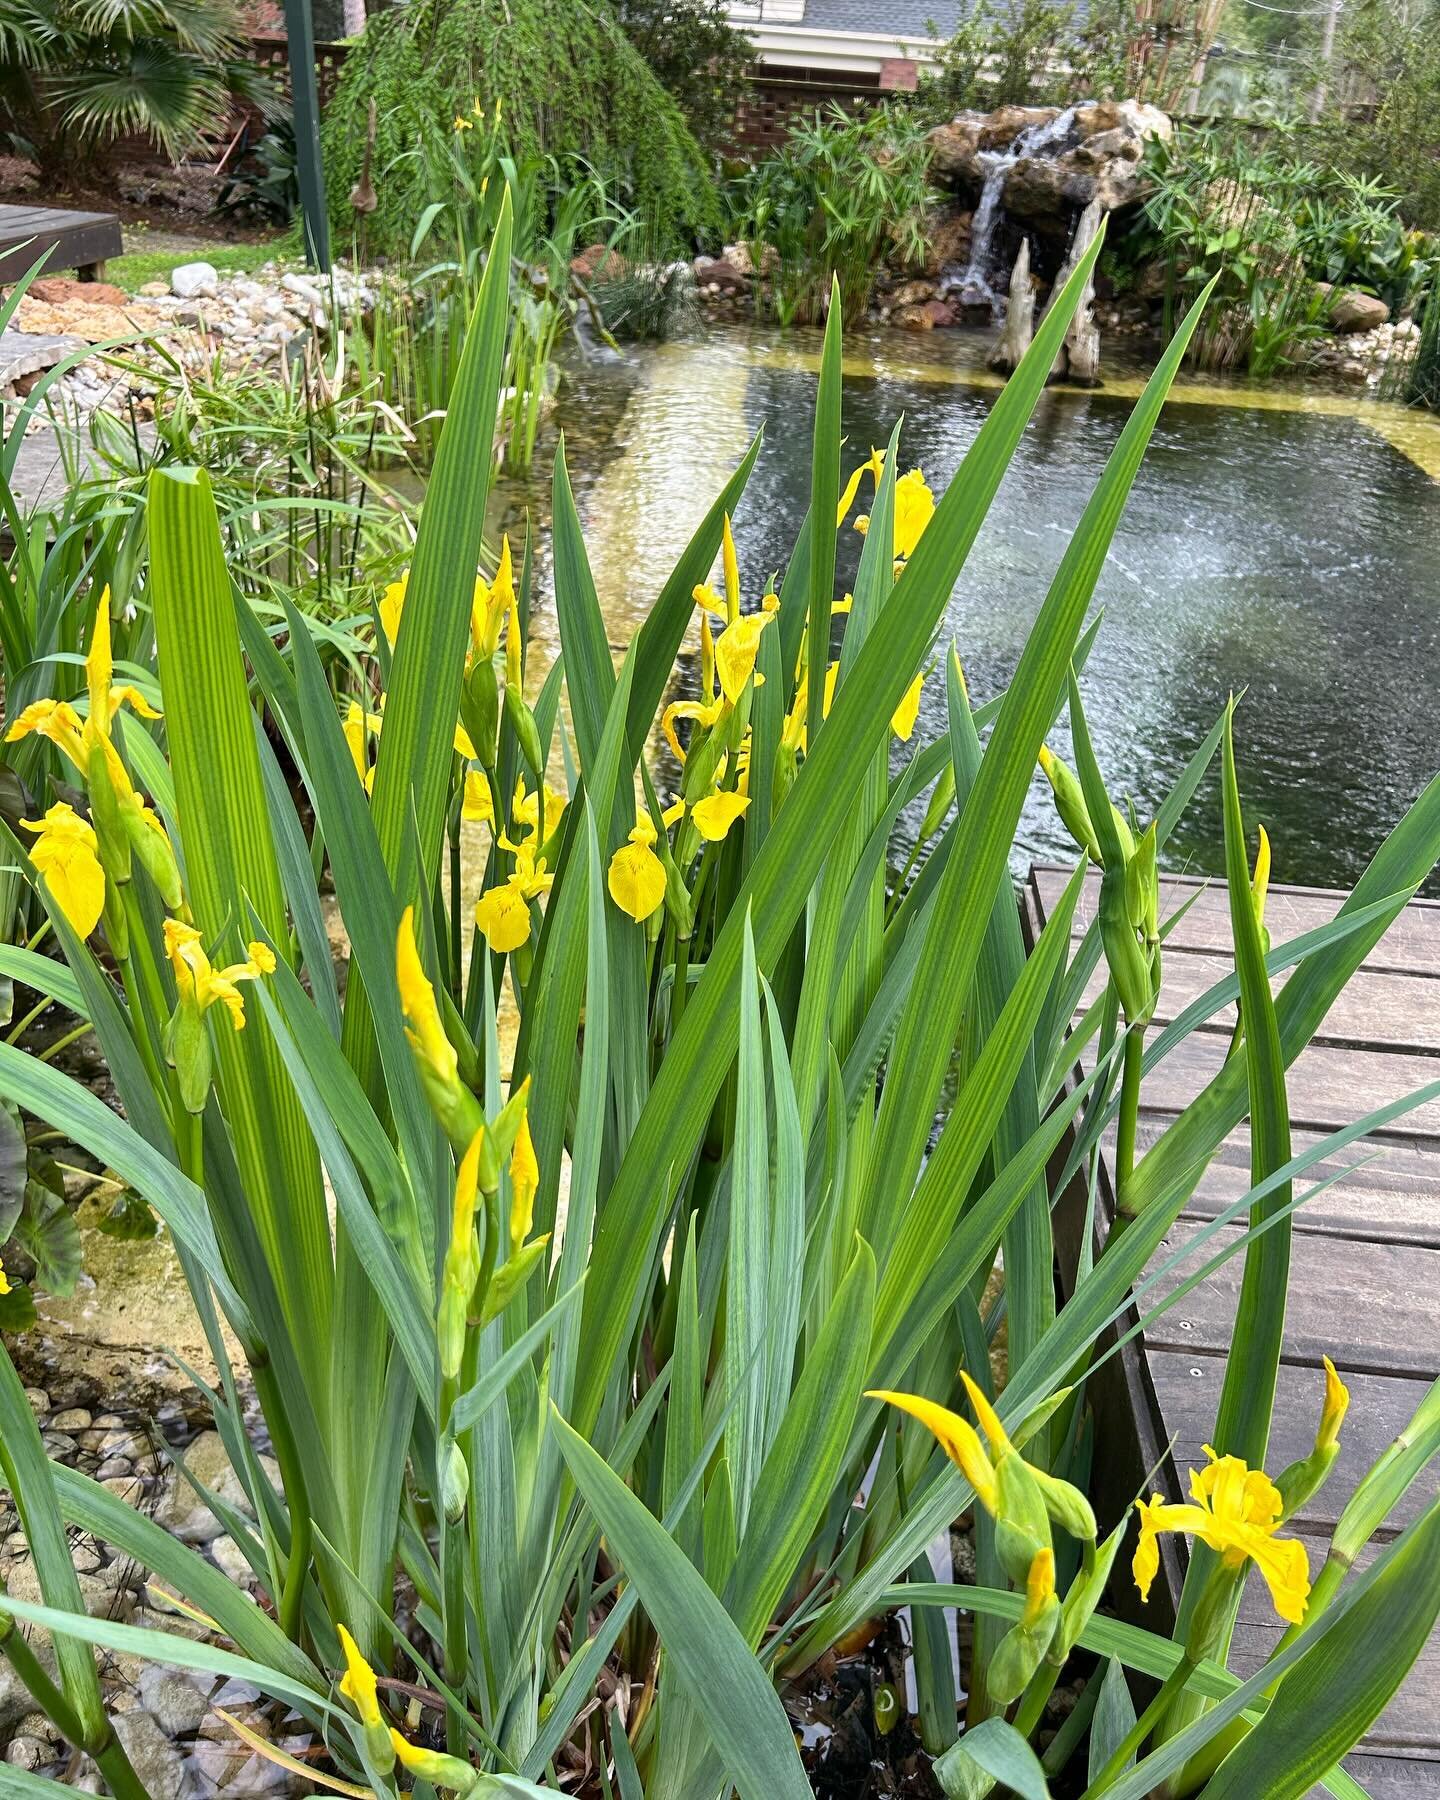 Yellow flag iris in full bloom! This plant is known for its ability to live in wet areas of the landscape where many other plants would perform poorly. Low maintenance, and great for a pond (as shown here). Available for purchase at our nursery. Call